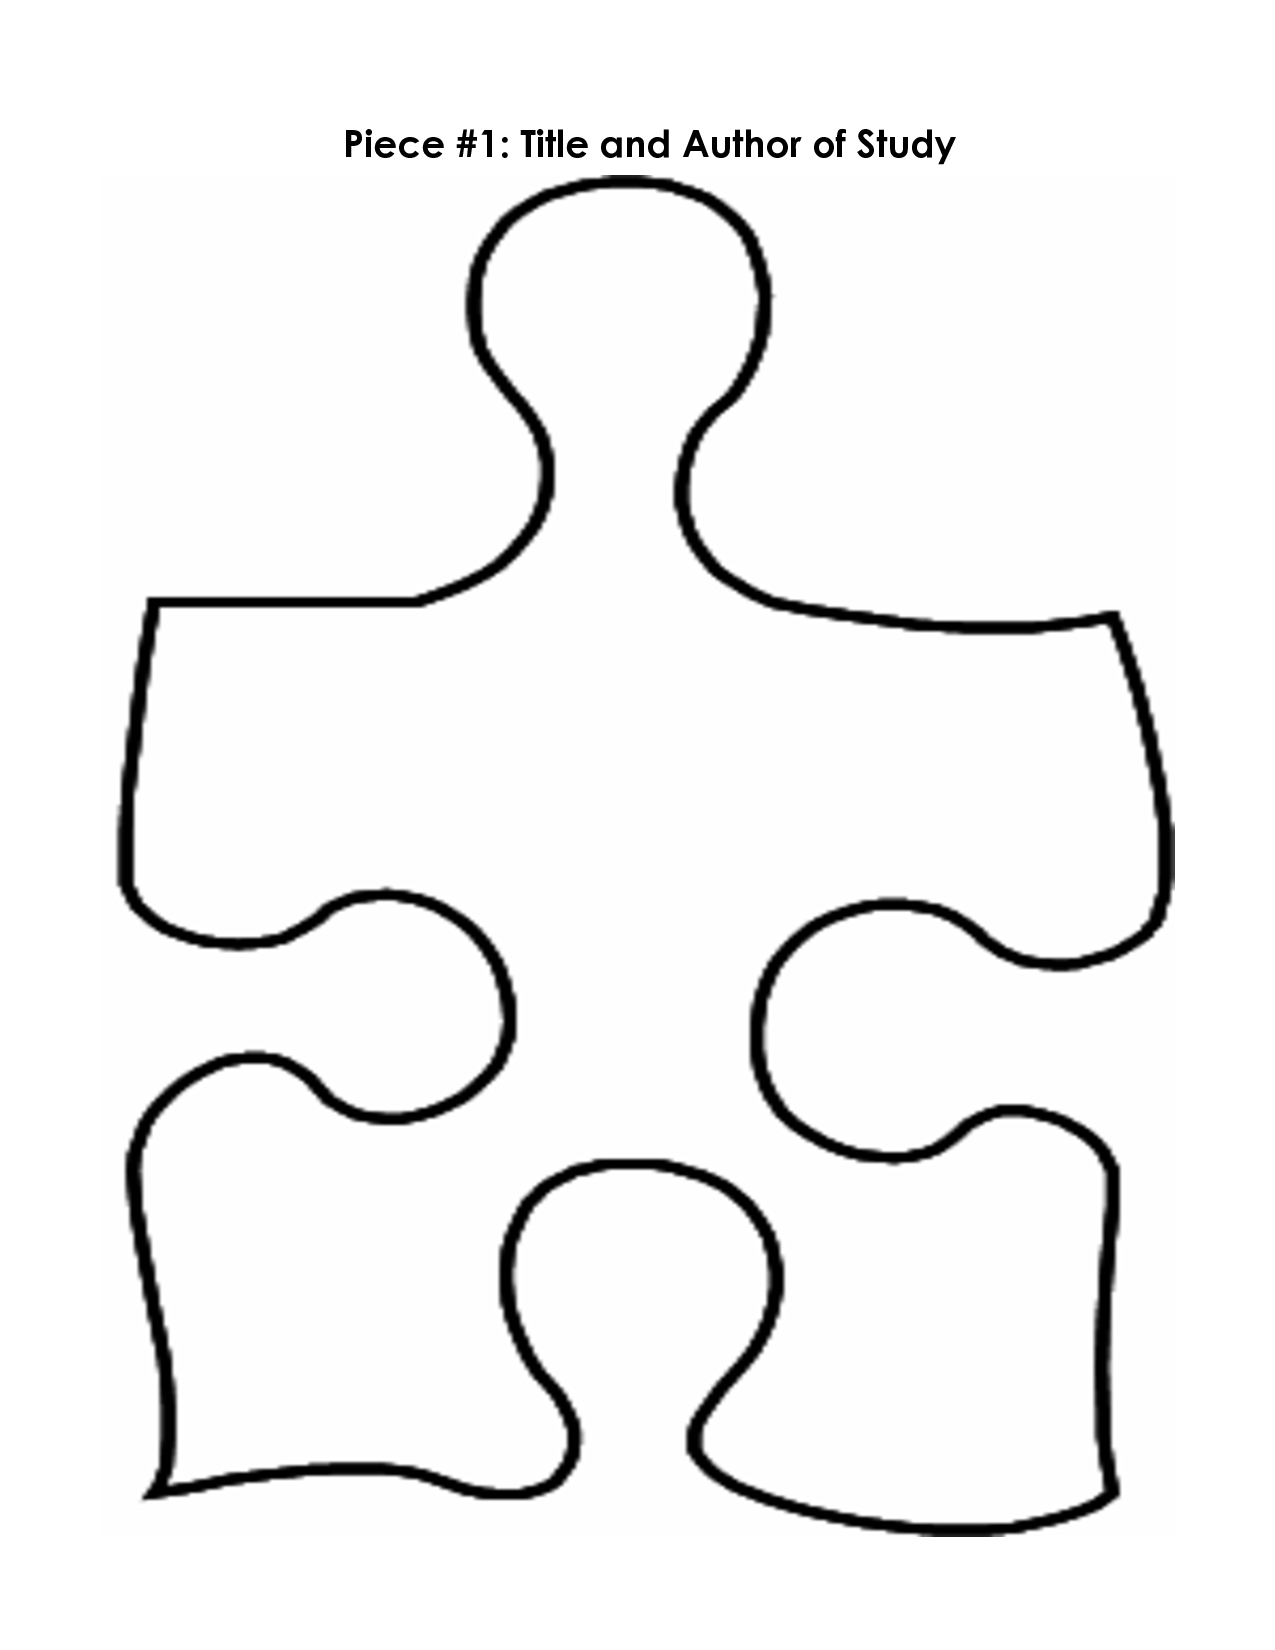 Free Puzzle Pieces Template, Download Free Clip Art, Free Clip Art - Printable Colored Puzzle Pieces